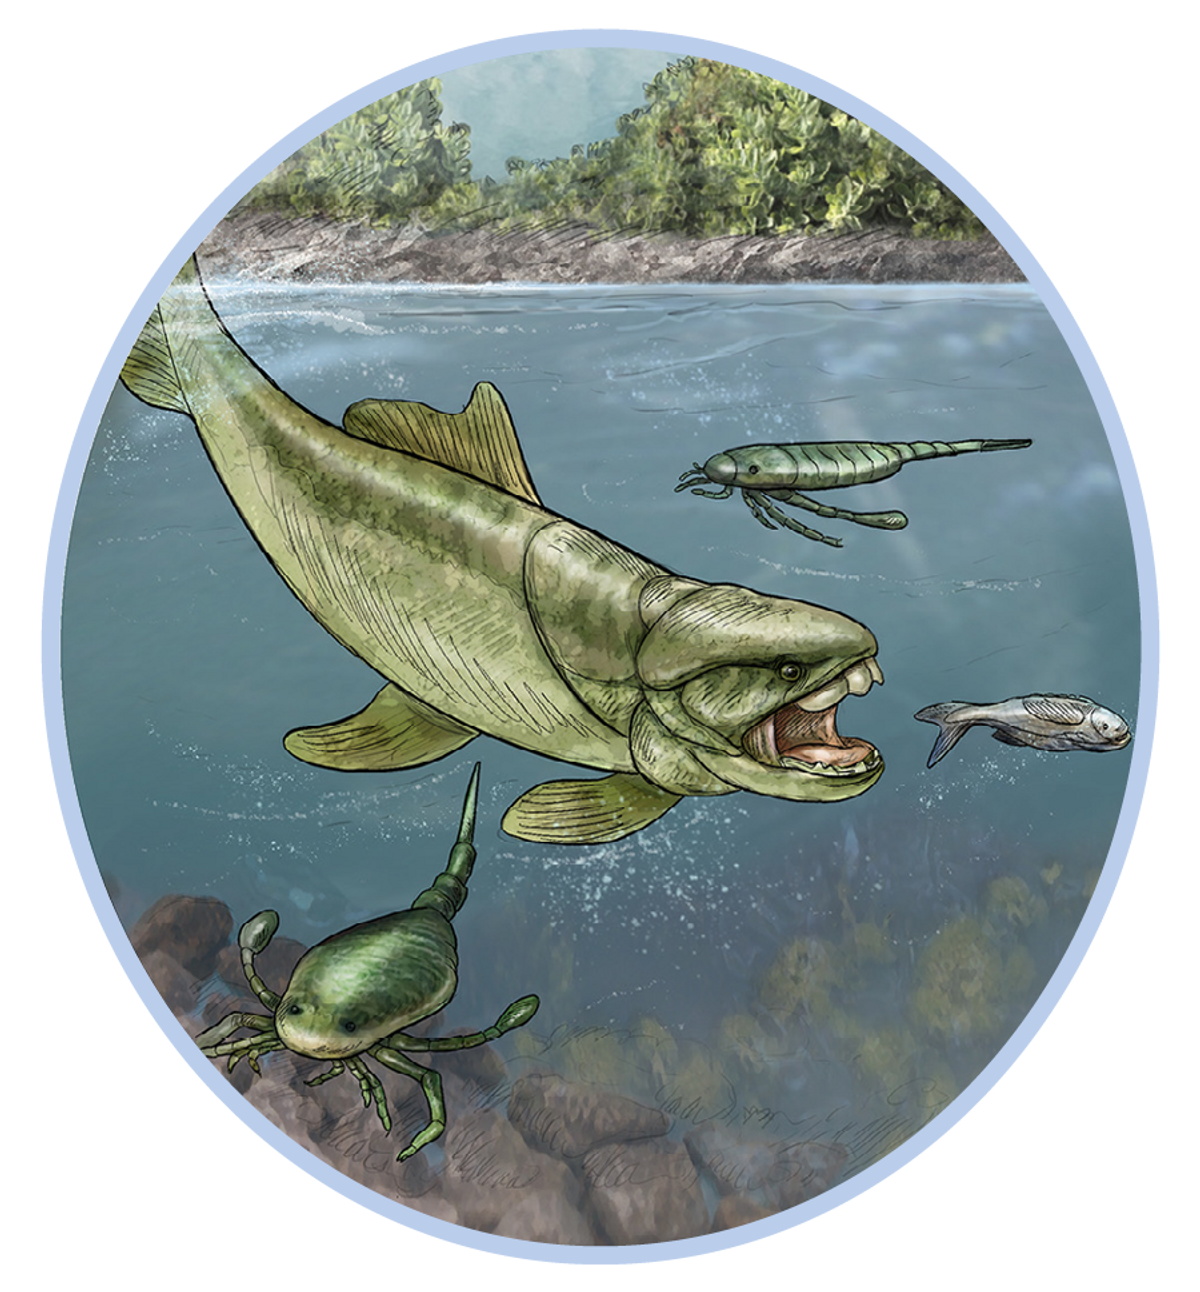 Illustration of extinct creatures from the late Devonian period